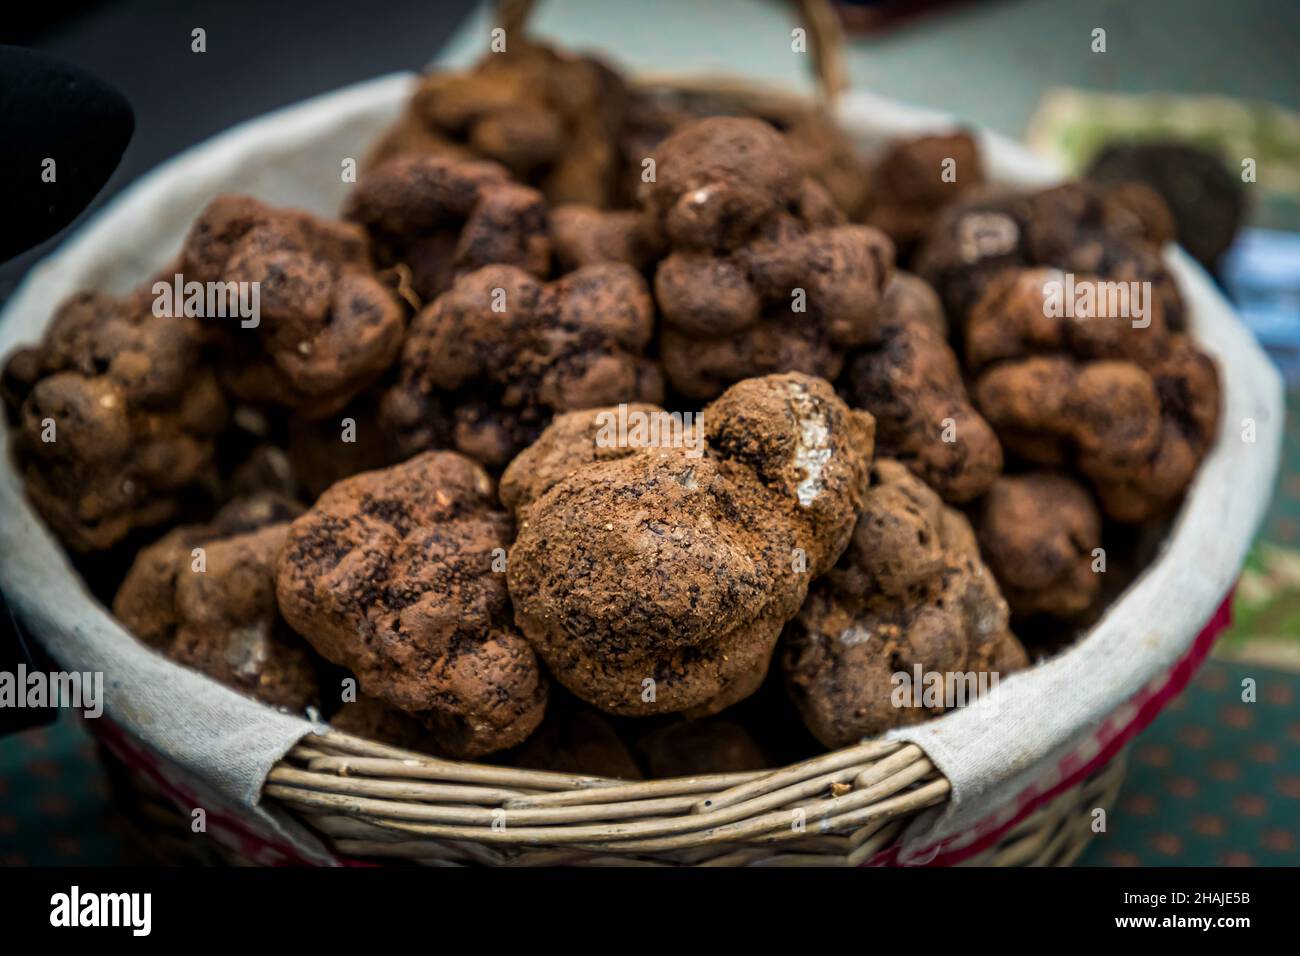 Tuber Melanosporum is also called black truffle. It is very favored and is one of the most expensive edible mushrooms in the world. Shortly before Christmas, the price per kilo rises to 1,000 euros or more. Aups, France Stock Photo